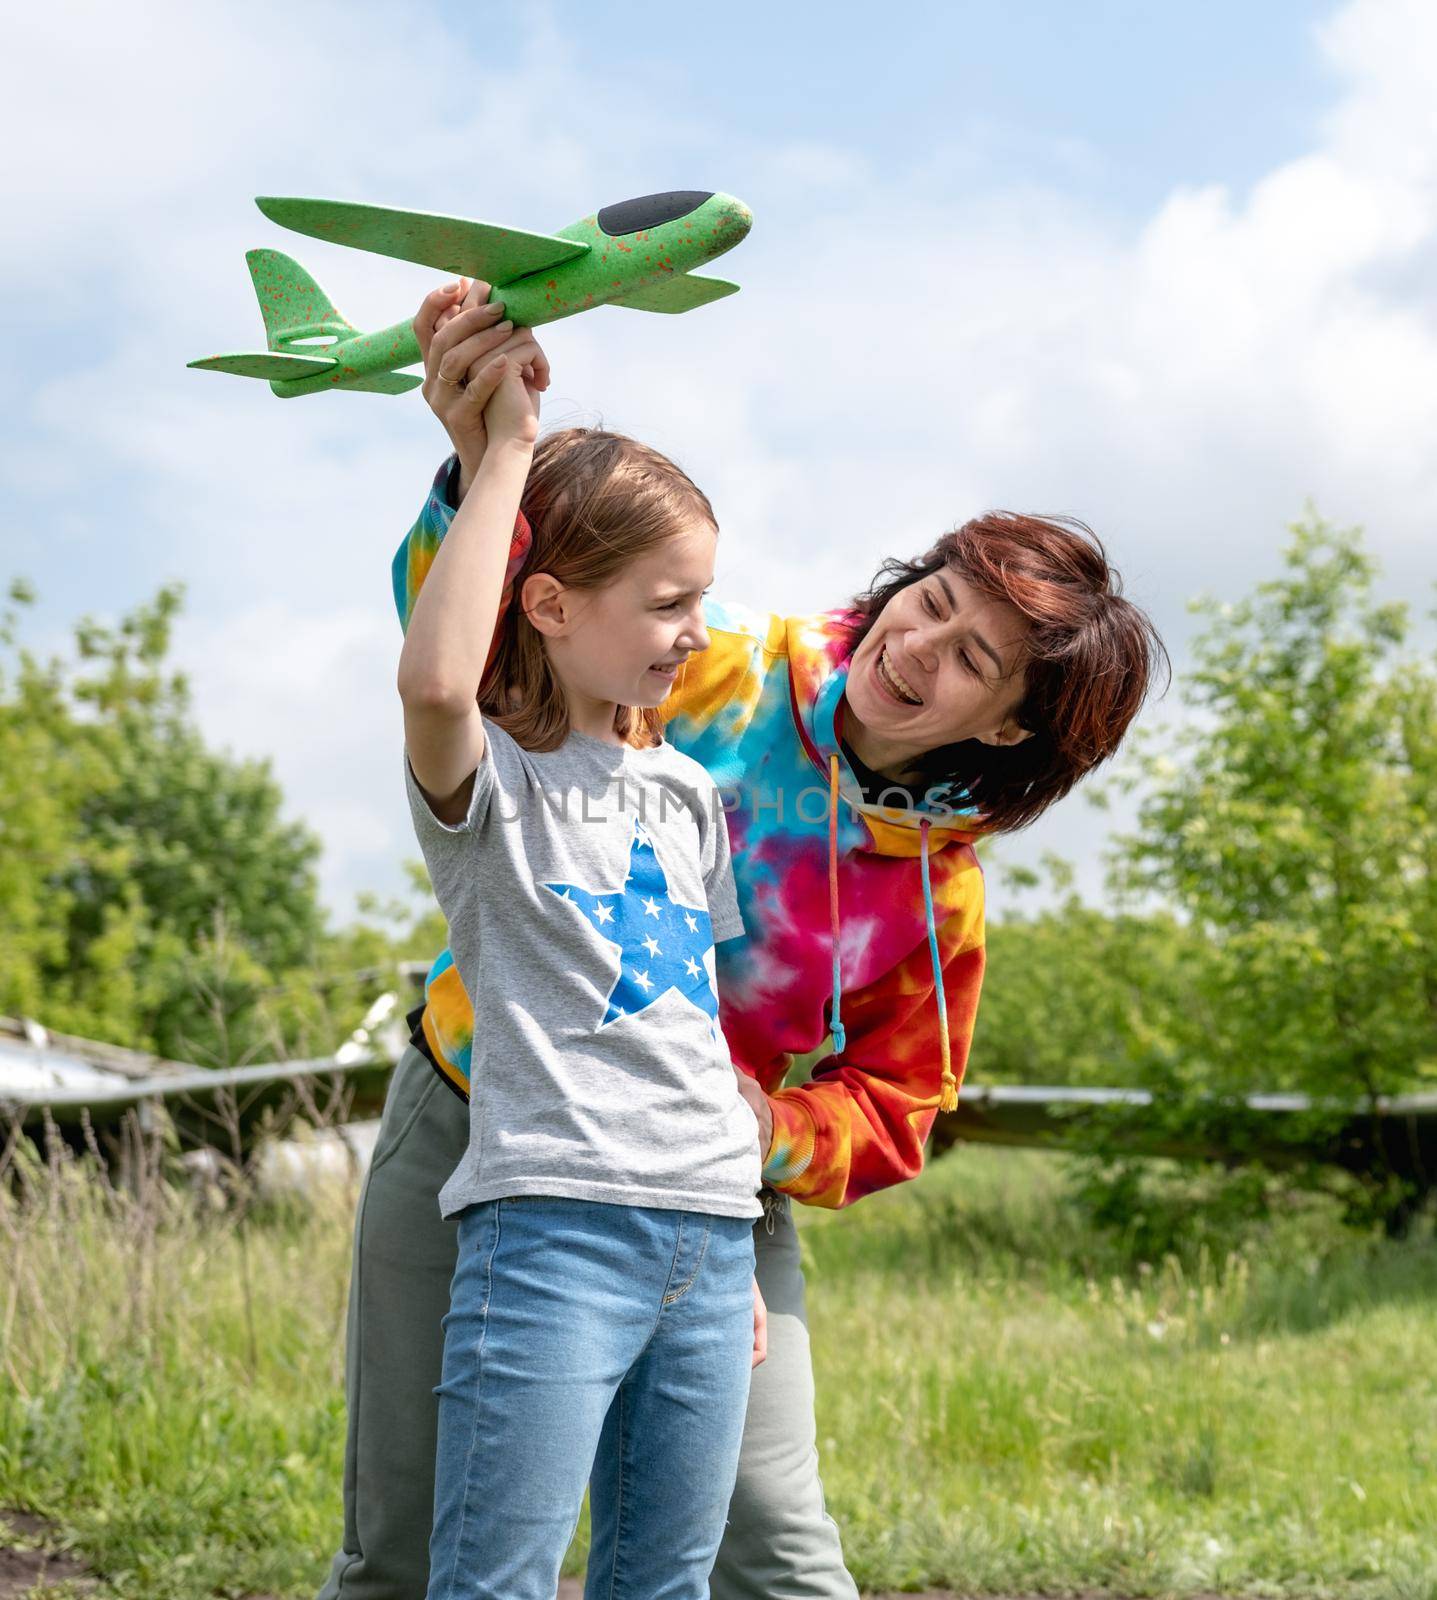 Mother and daughter playing with toy plane by GekaSkr